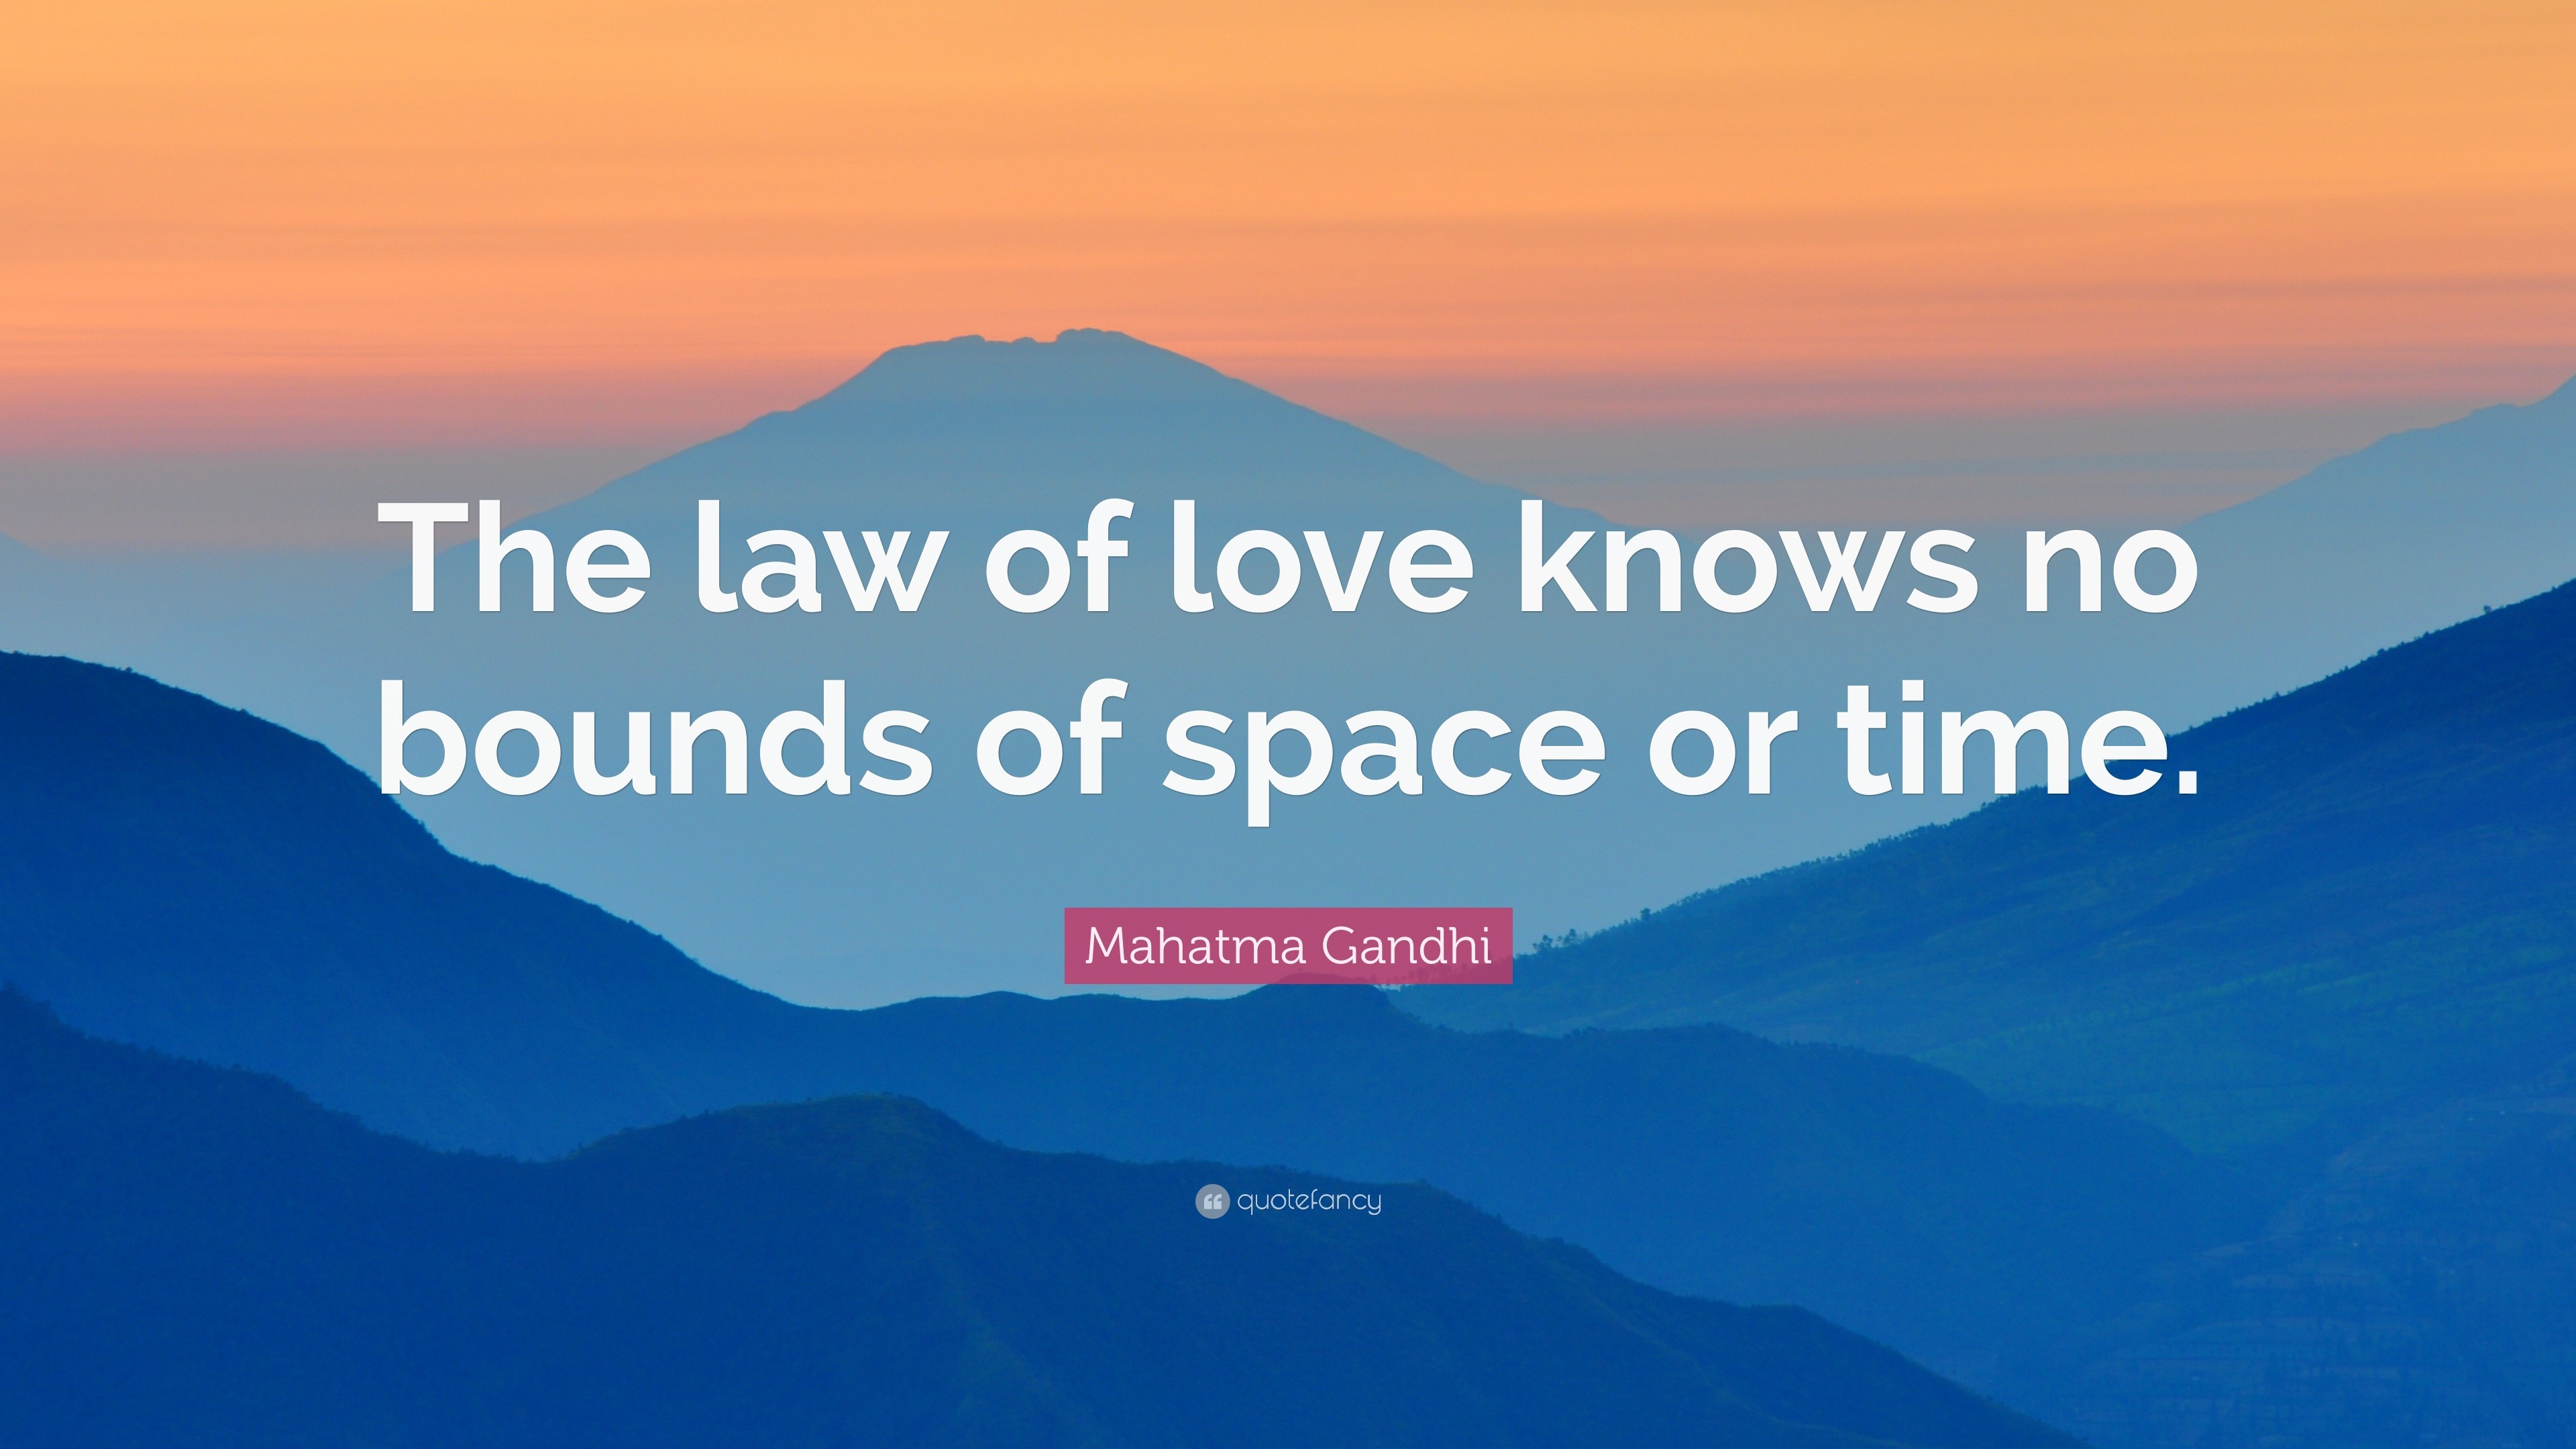 Mahatma Gandhi Quote “The law of love knows no bounds of space or time